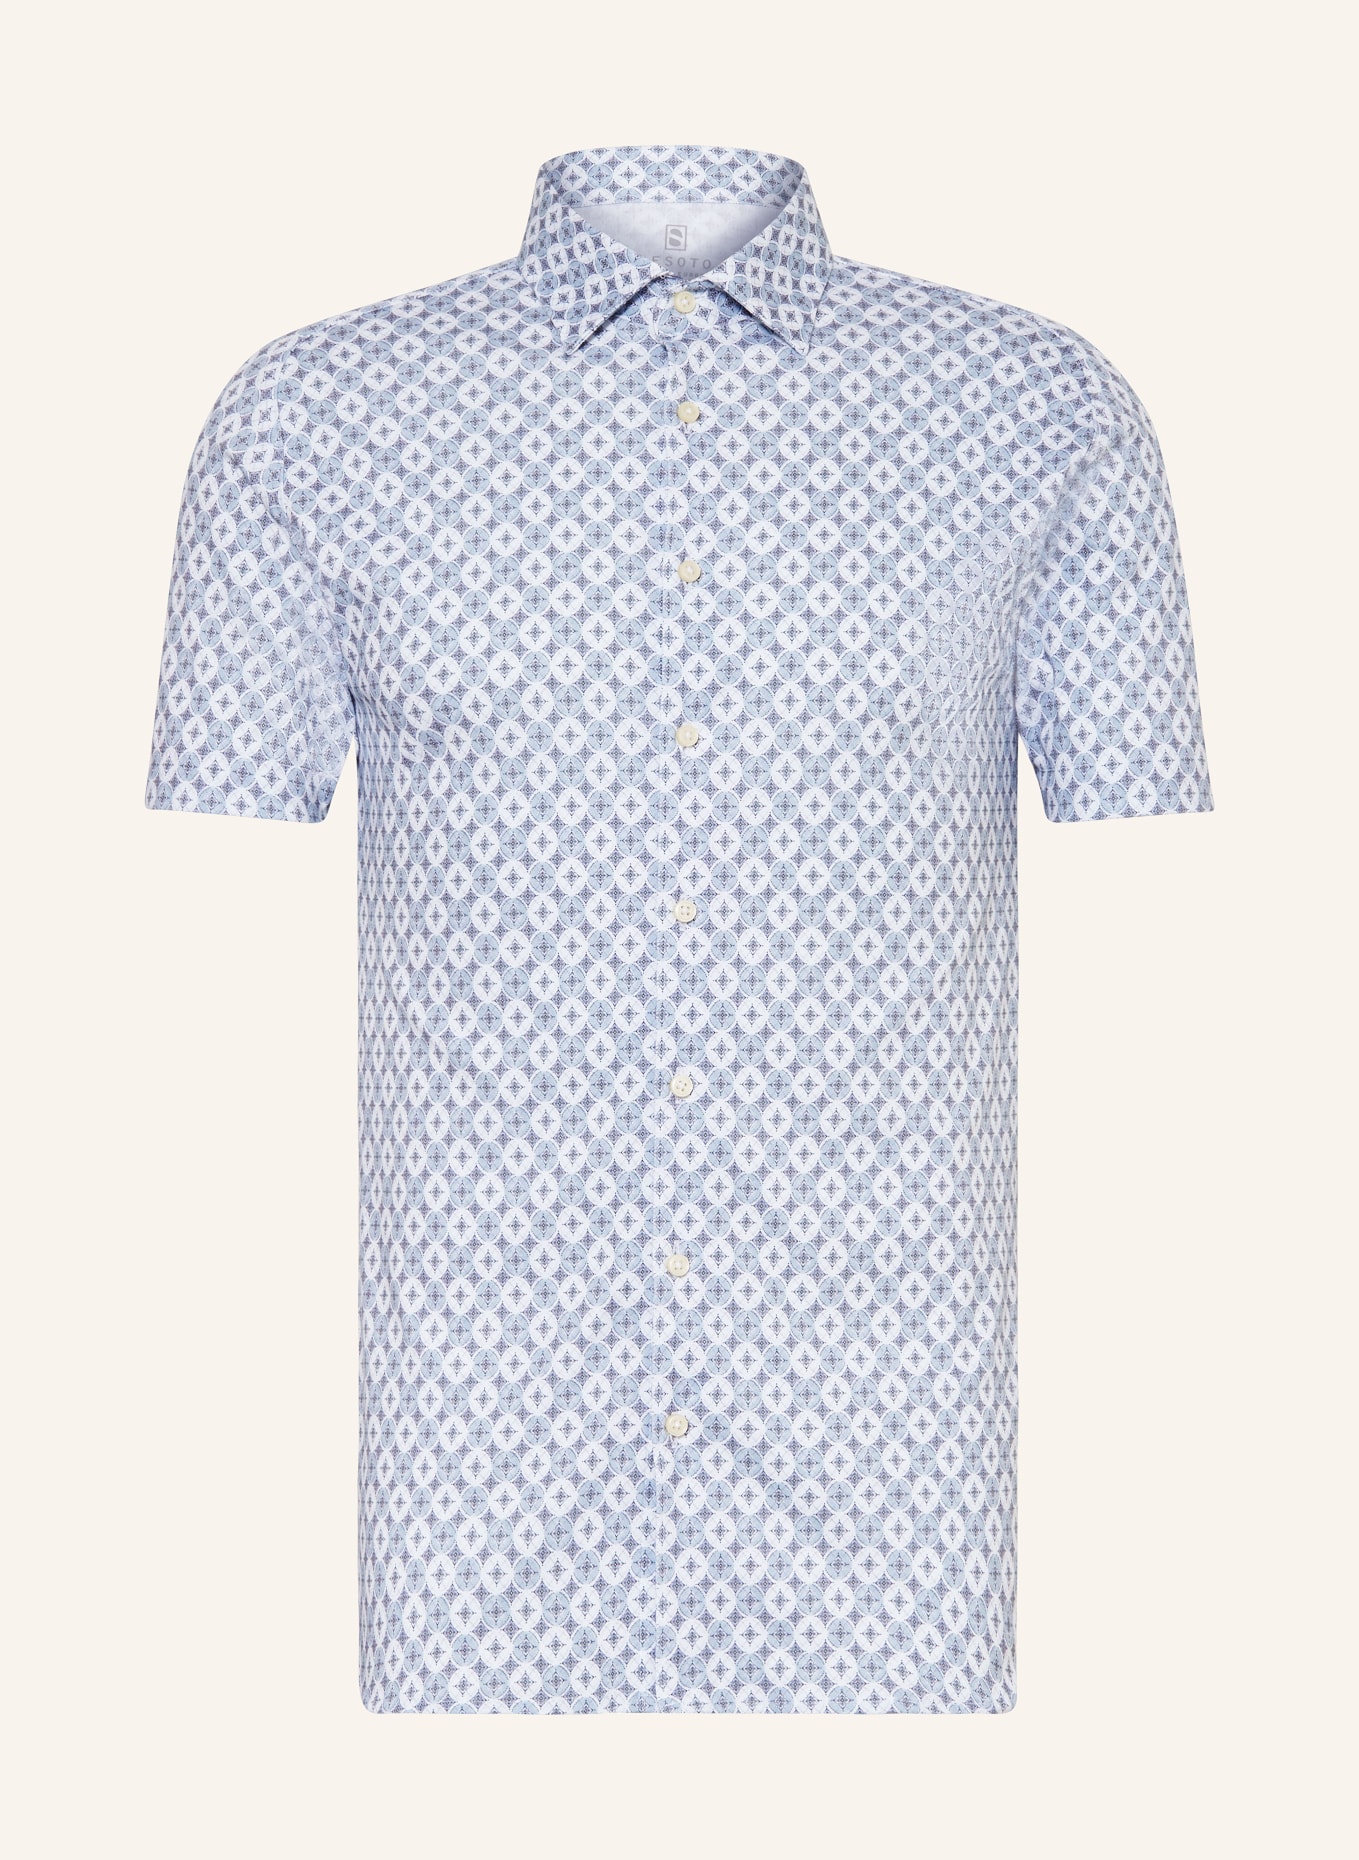 DESOTO Short sleeve shirt slim fit in jersey, Color: GRAY/ BLUE GRAY (Image 1)